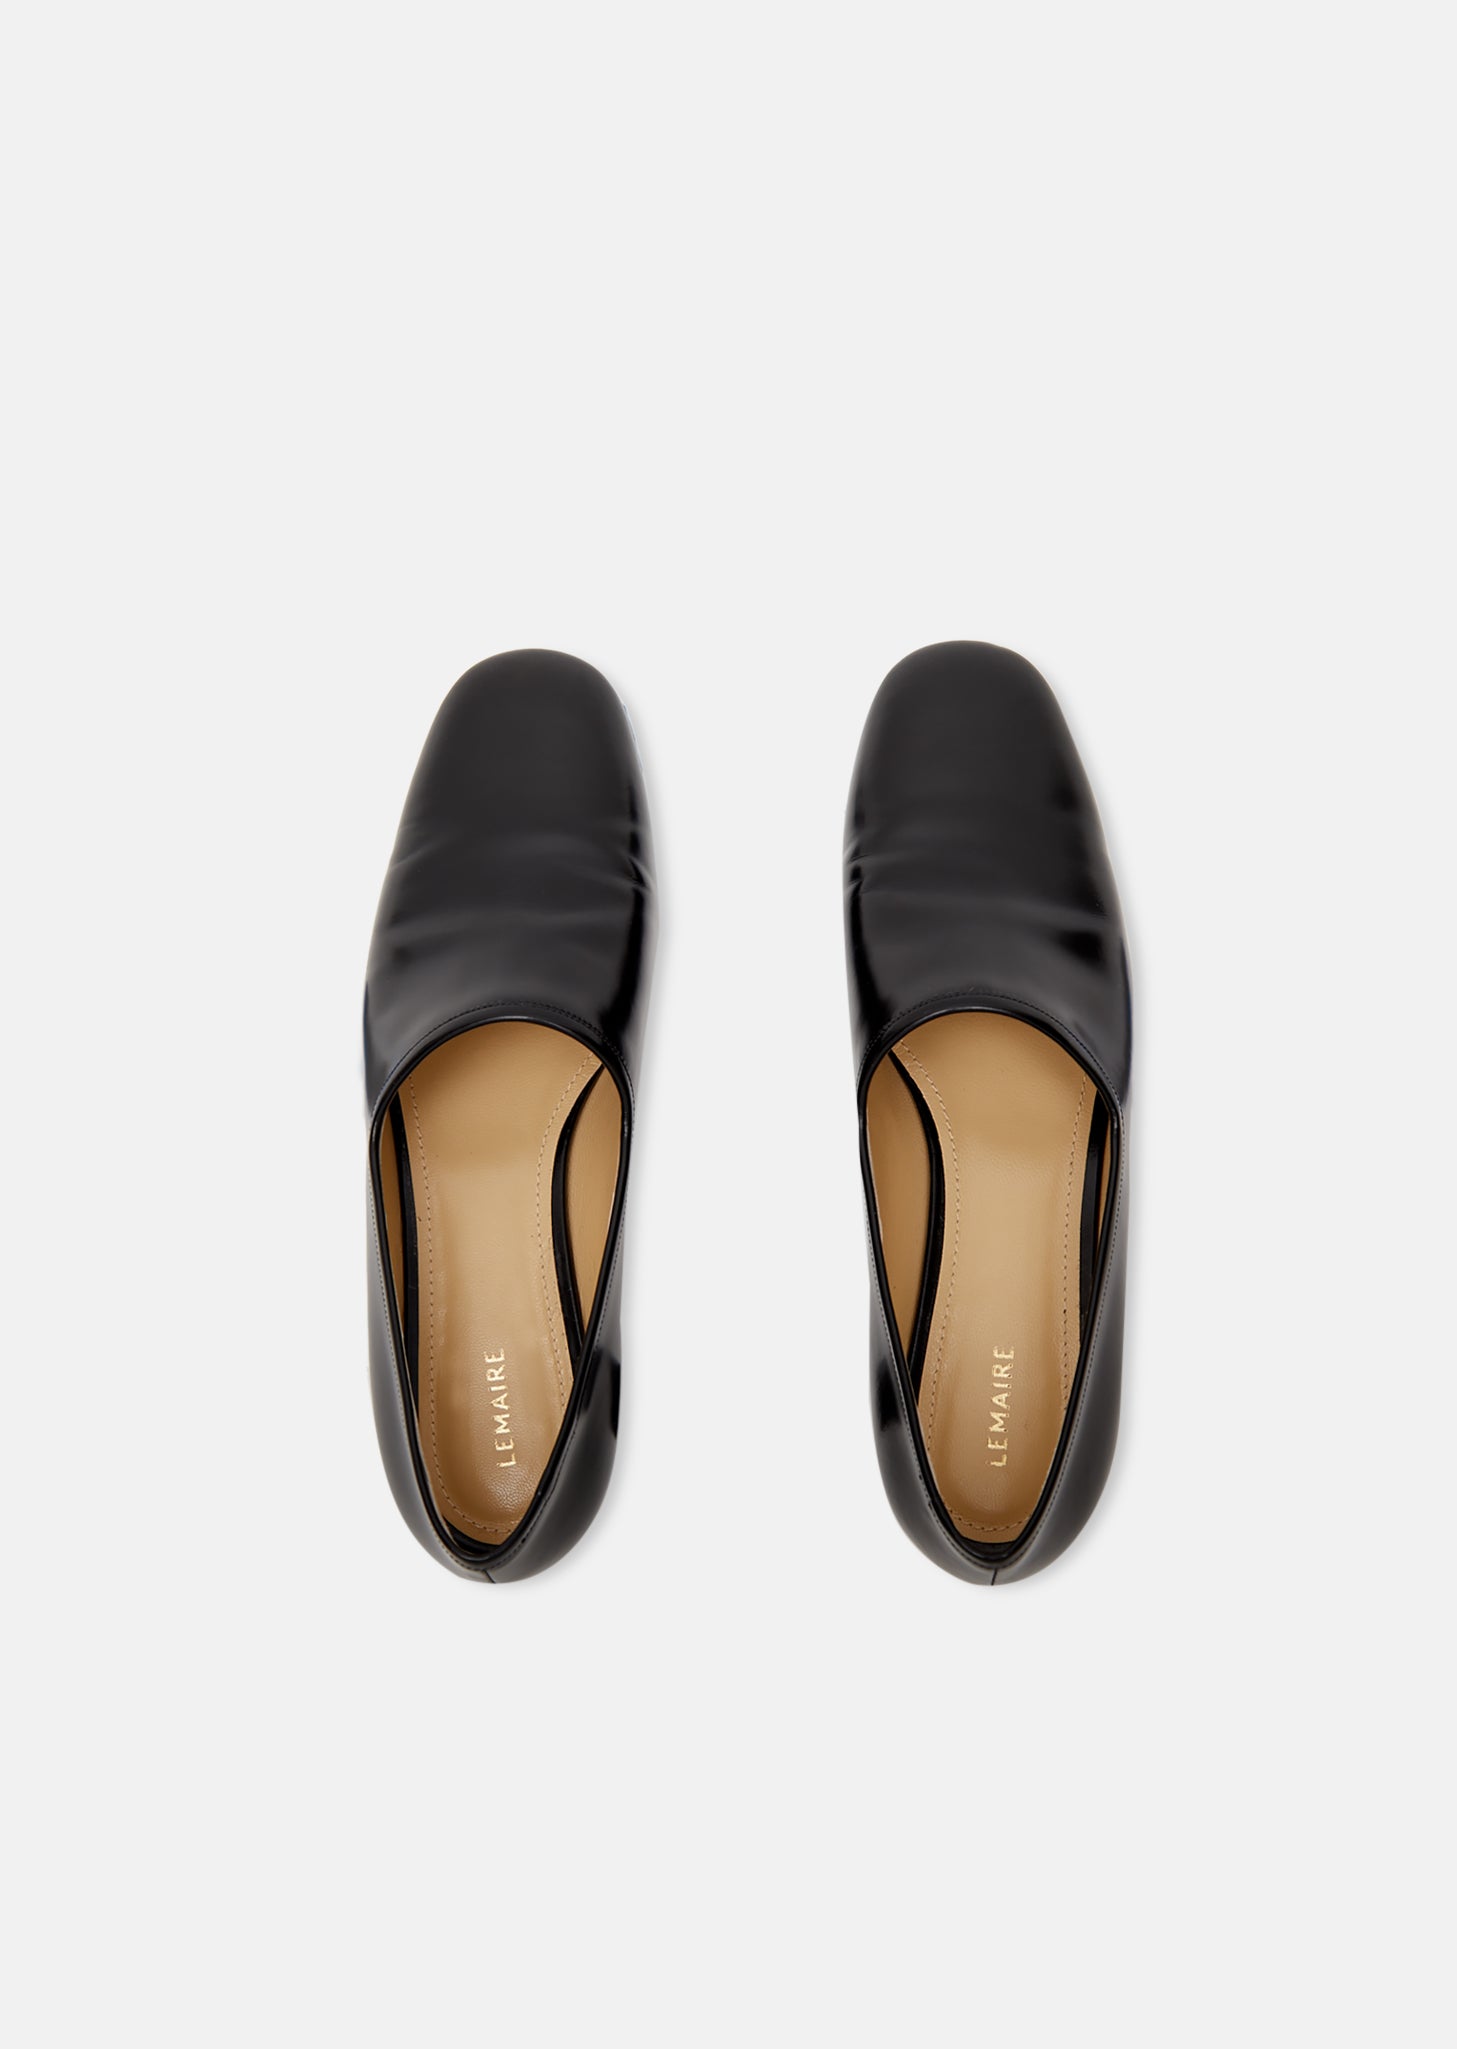 Black Leather Slip On Flats by Lemaire 